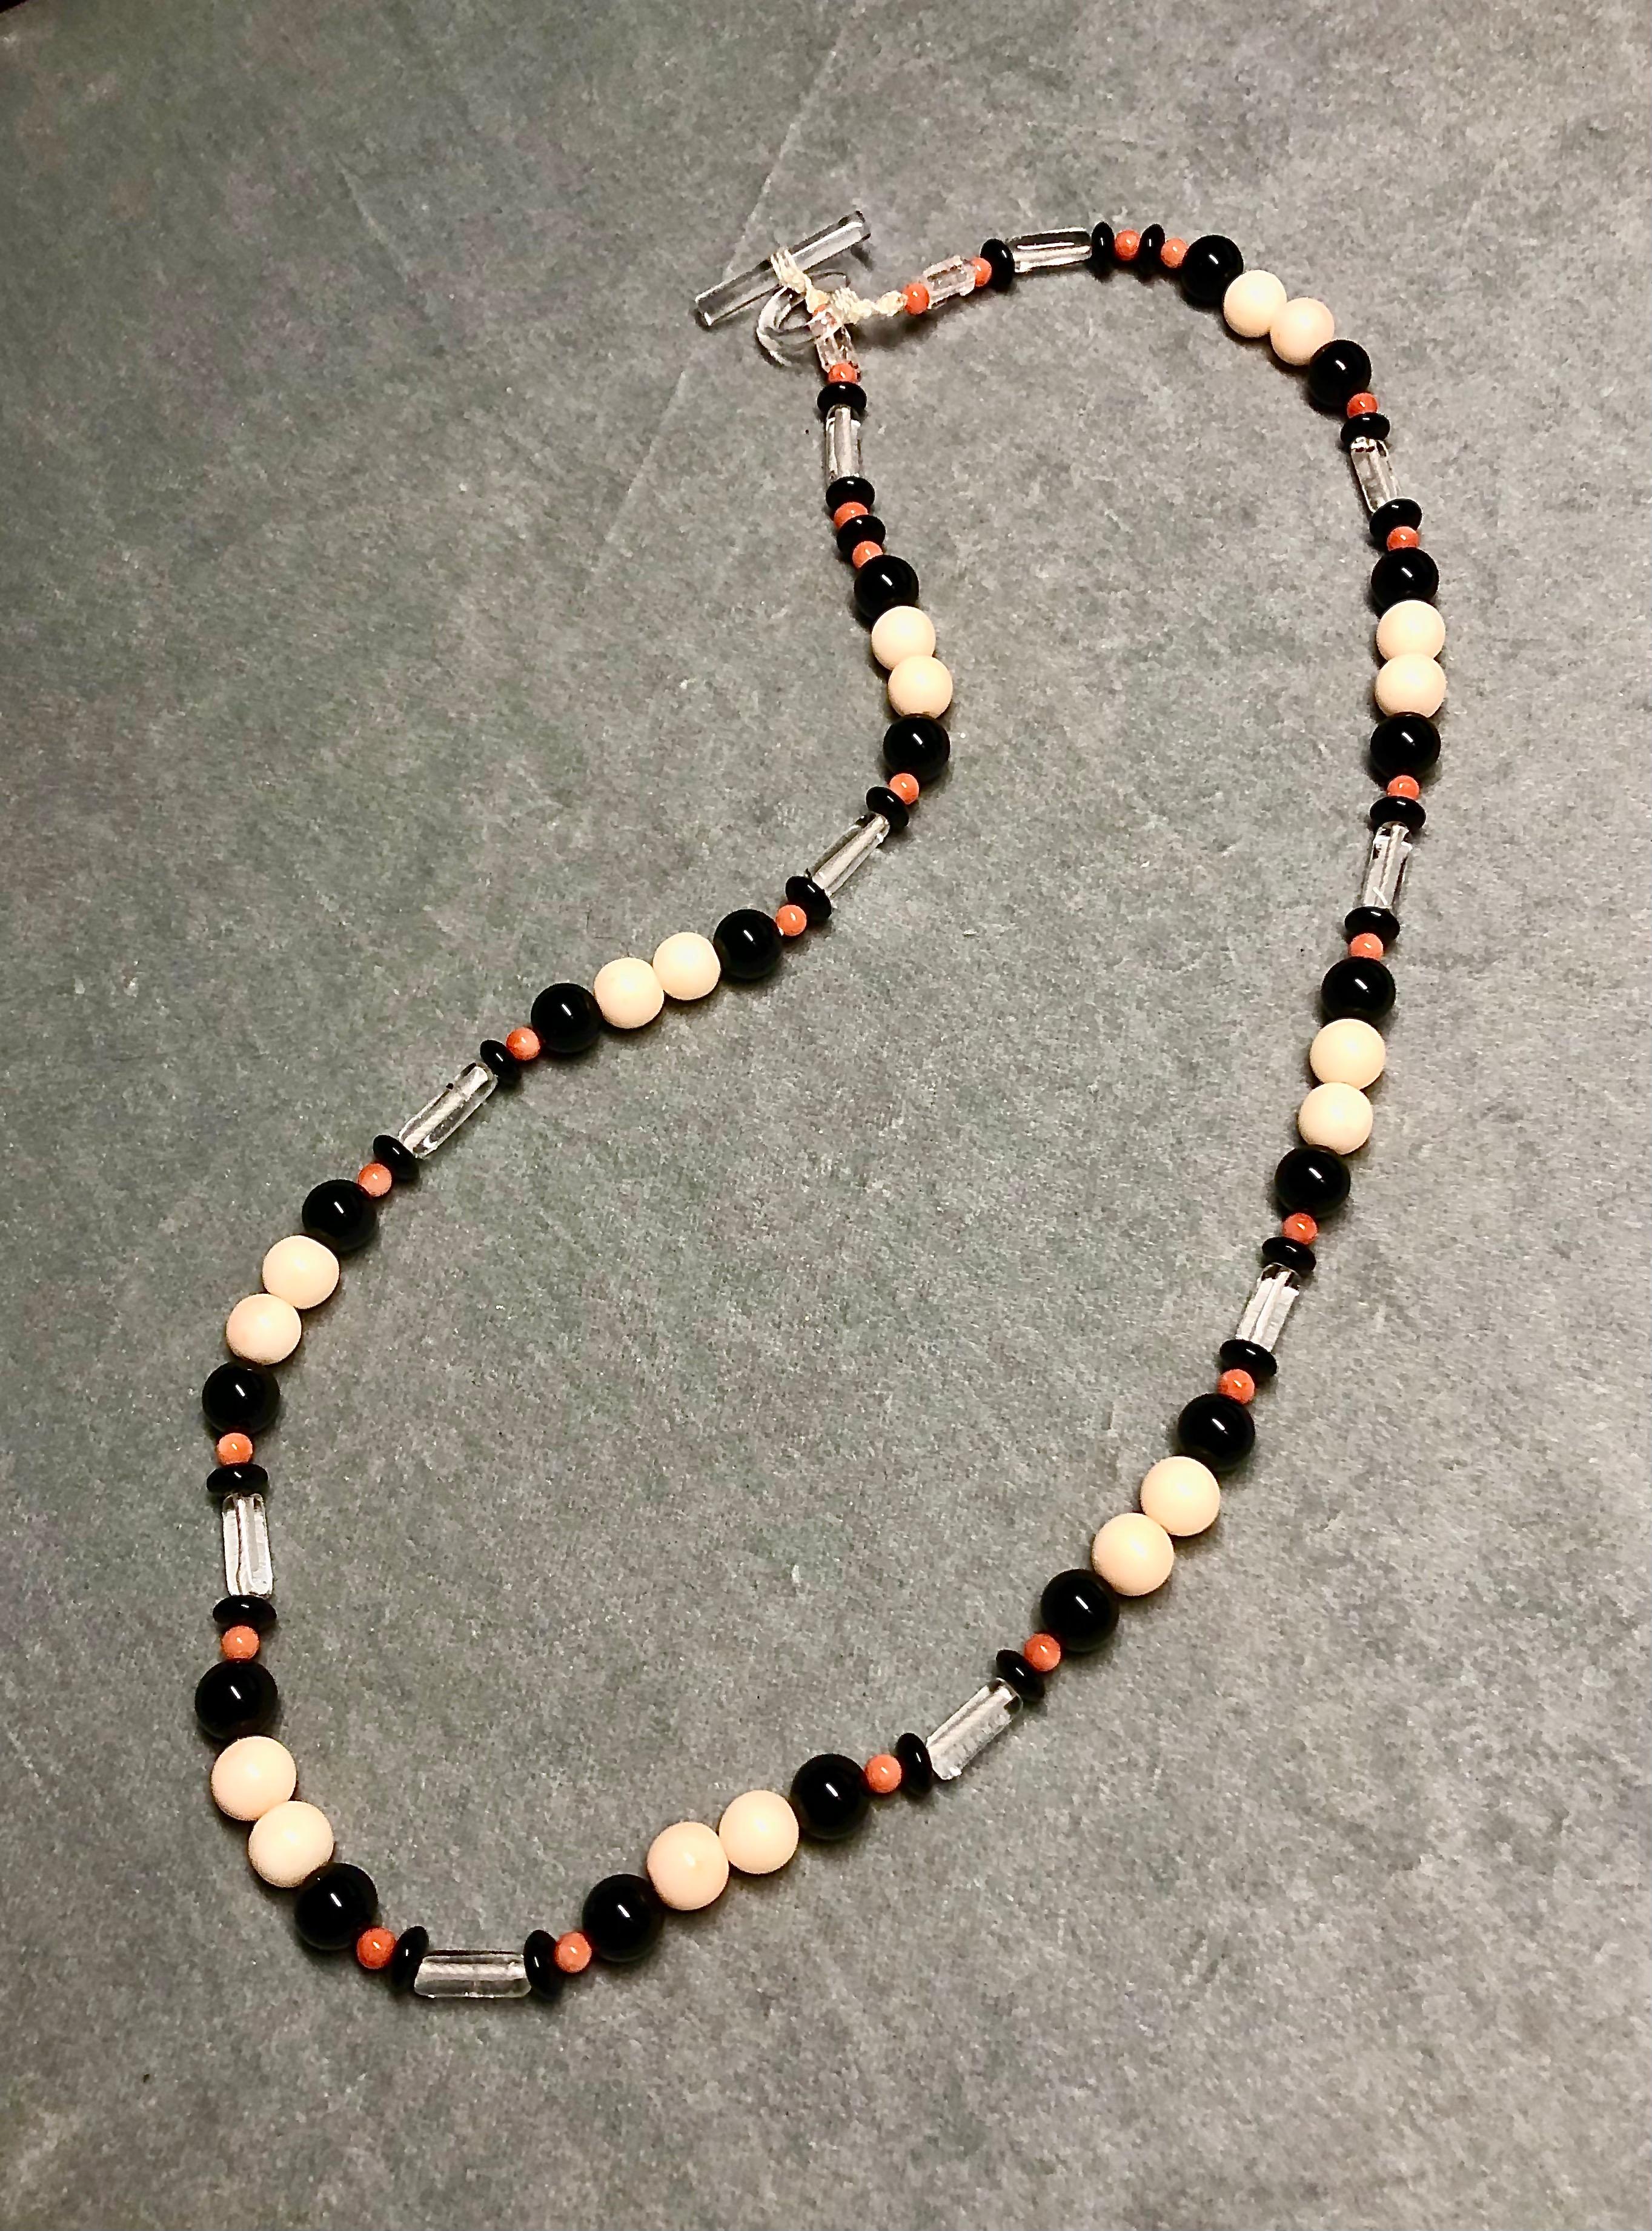 Double strand necklace. Two necklaces, one a single strand with coordinating pattern designed to be worn inside sautoir are separately as desired. Sautoir with red/orange coral beads, black onyx beads, rock crystal tubes and blackened silver